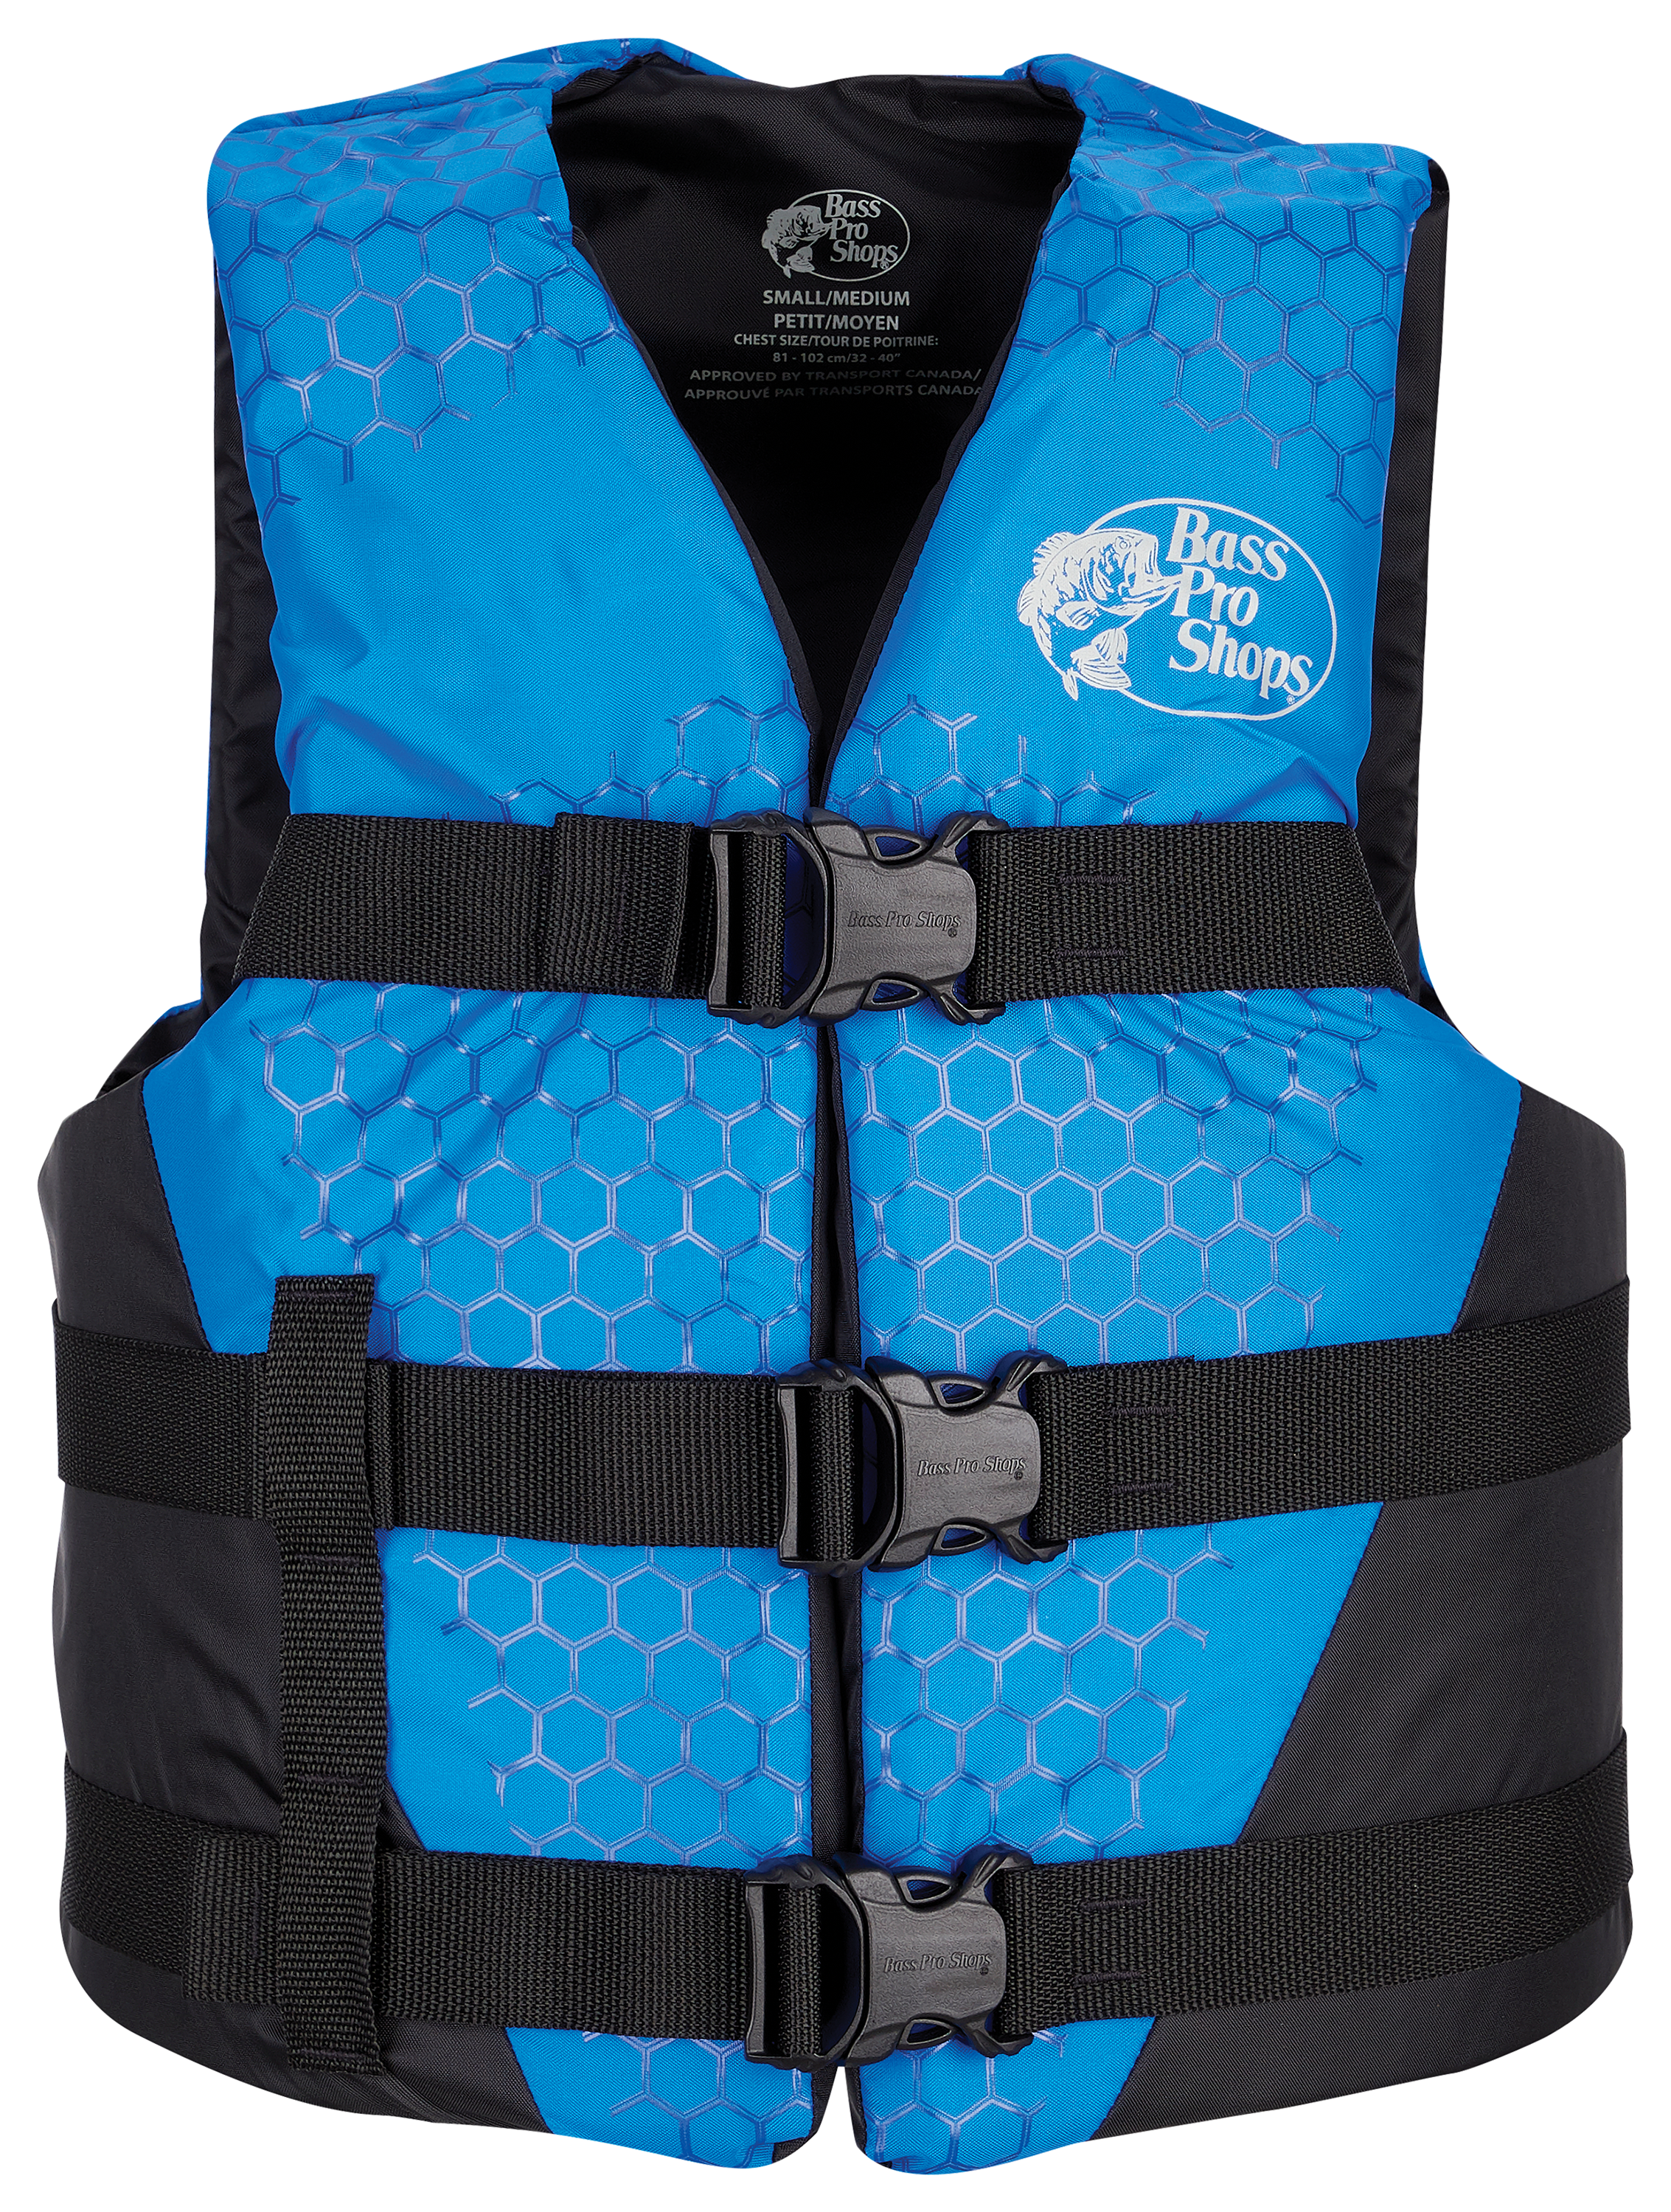 Bass Pro Shops Traditional Water Ski Recreational Life Jacket for Adults Canada Version - Blue - 2XL 4XL